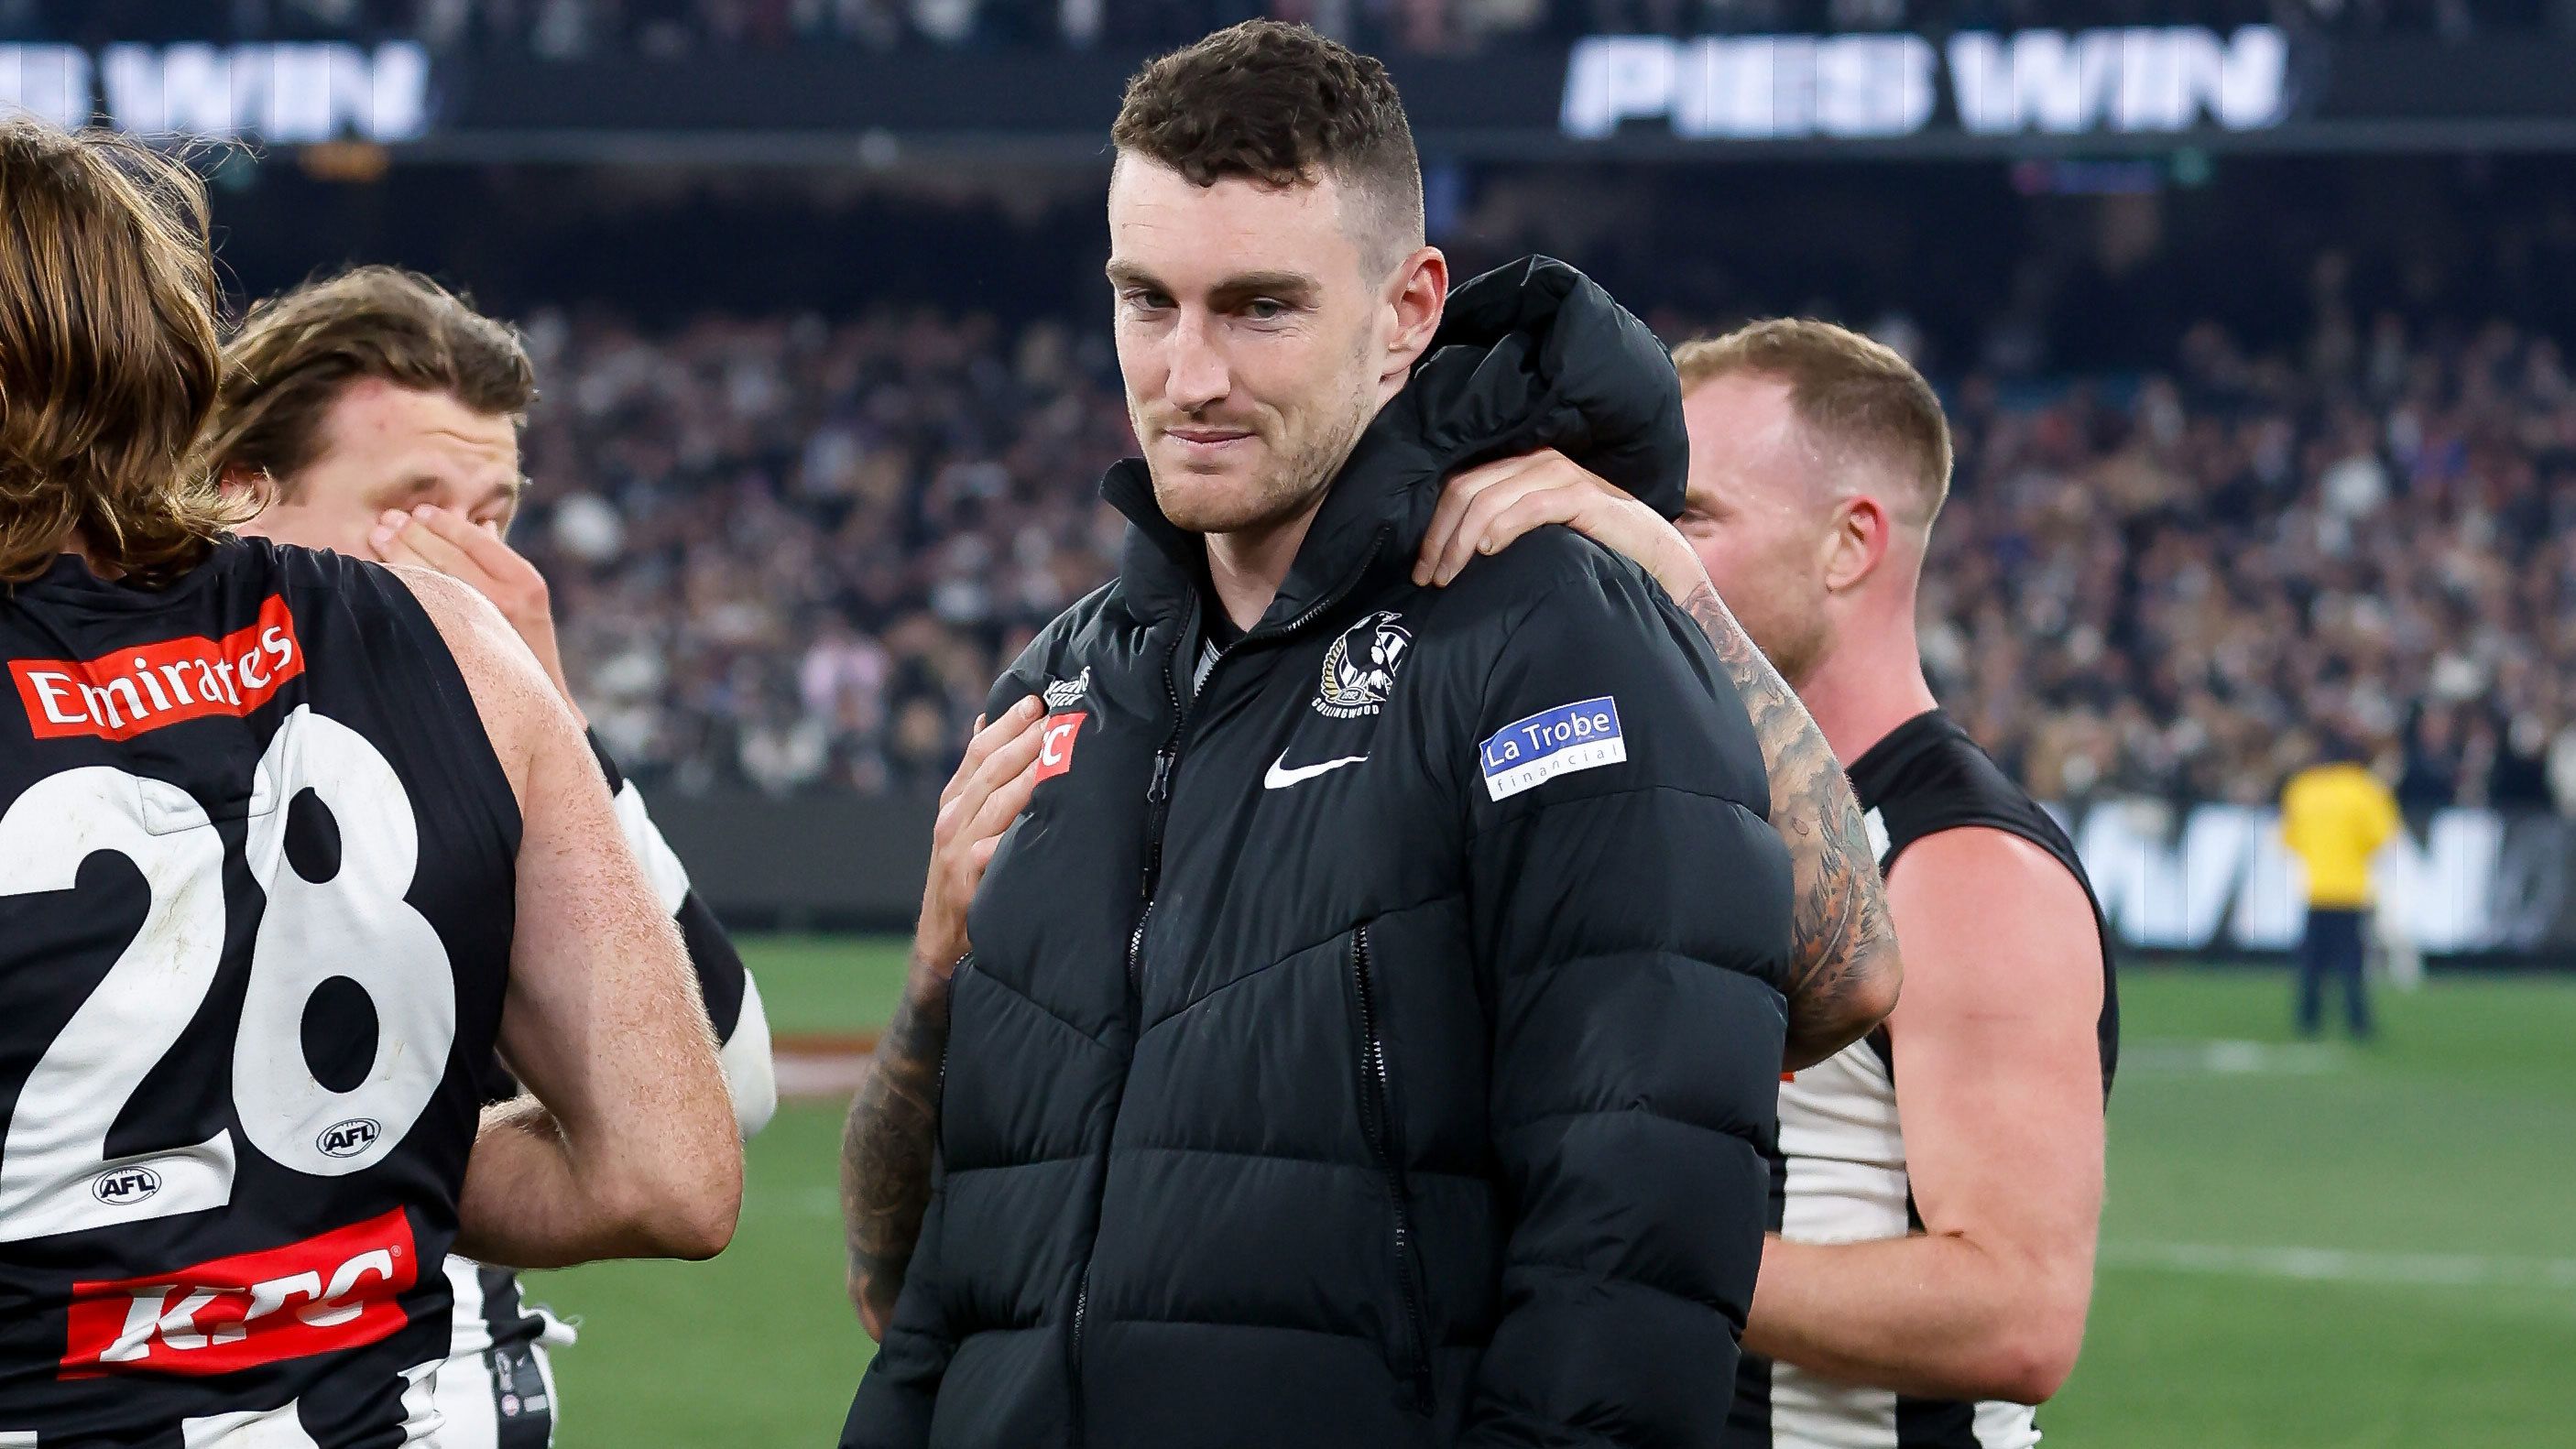 Daniel McStay of the Magpies is consoled by teammates after coming from the field early in their preliminary final win.